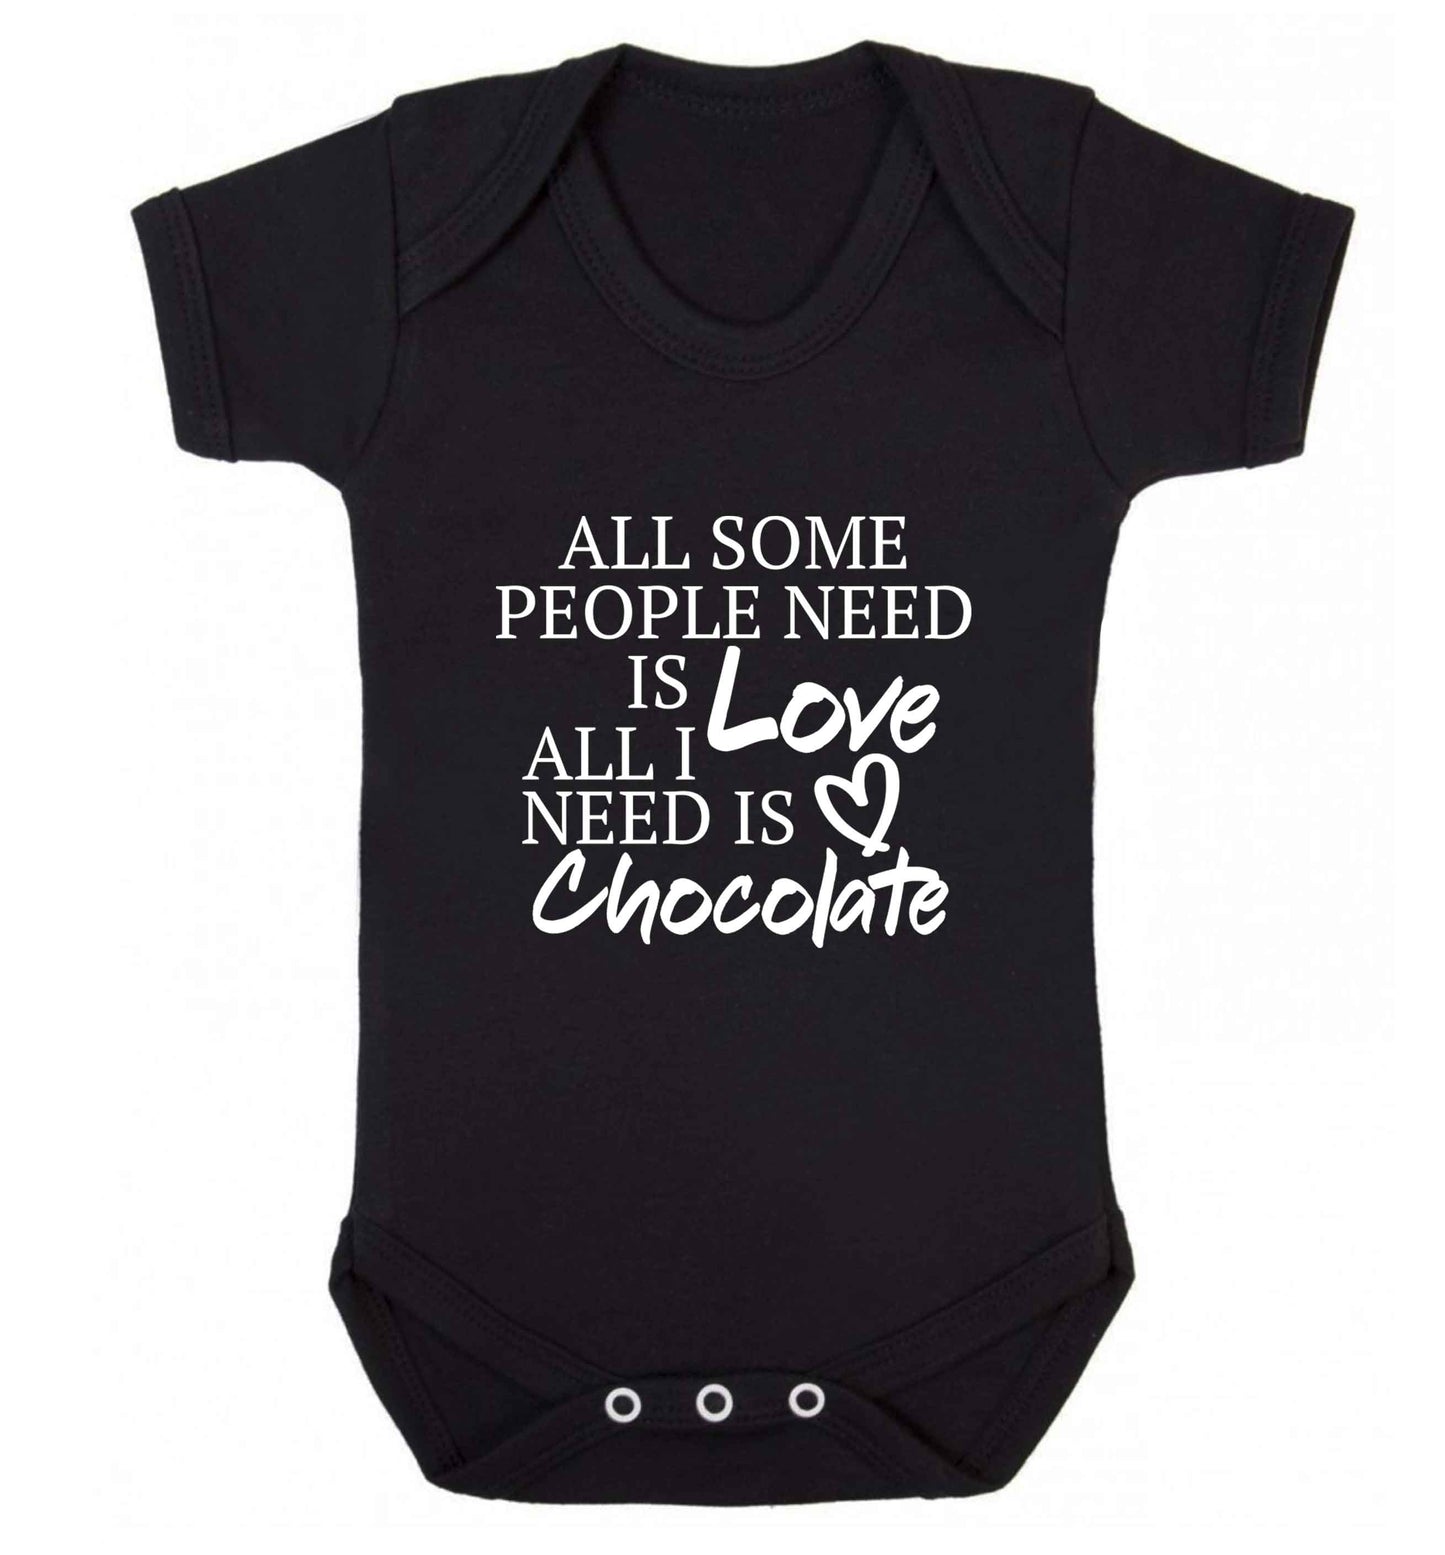 All some people need is love all I need is chocolate baby vest black 18-24 months